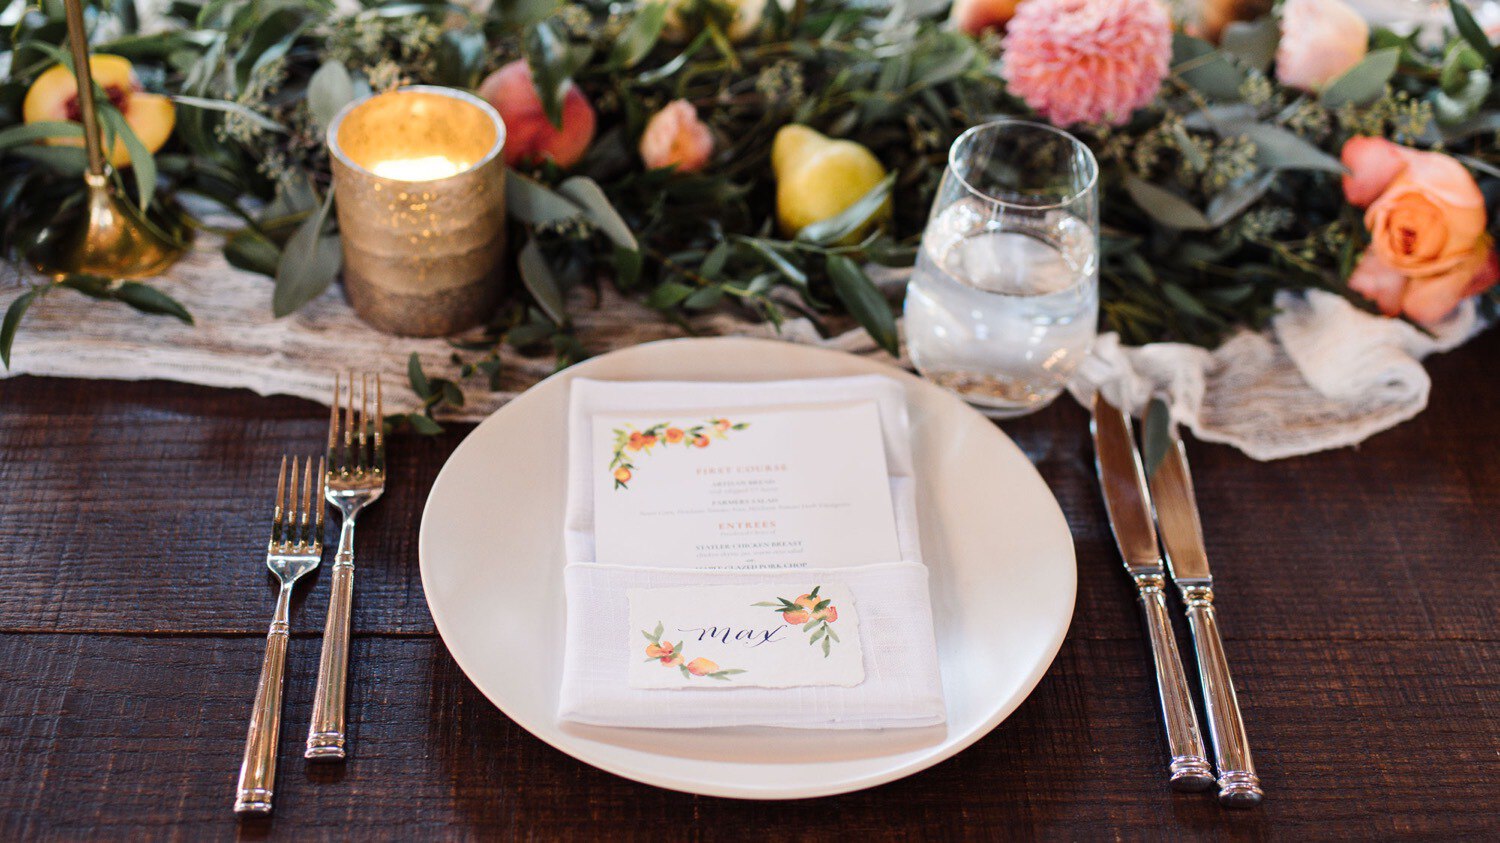 Place setting with hand painted place card and menu at summer wedding